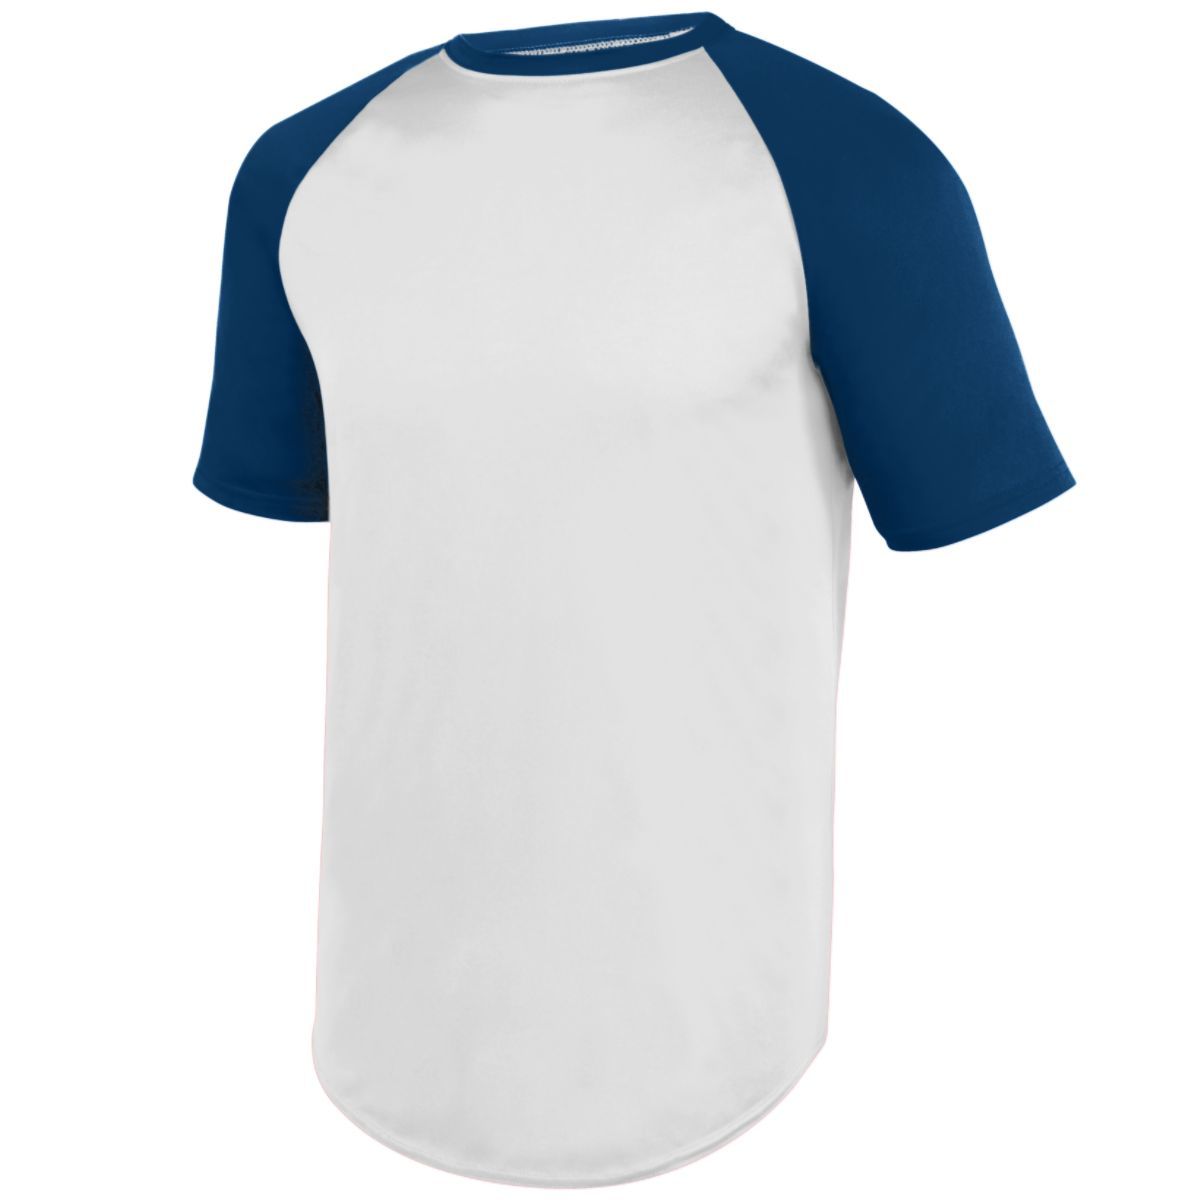 Augusta Sportswear Youth Wicking Short Sleeve Baseball Jersey in White/Navy  -Part of the Youth, Youth-Jersey, Augusta-Products, Baseball, Shirts, All-Sports, All-Sports-1 product lines at KanaleyCreations.com